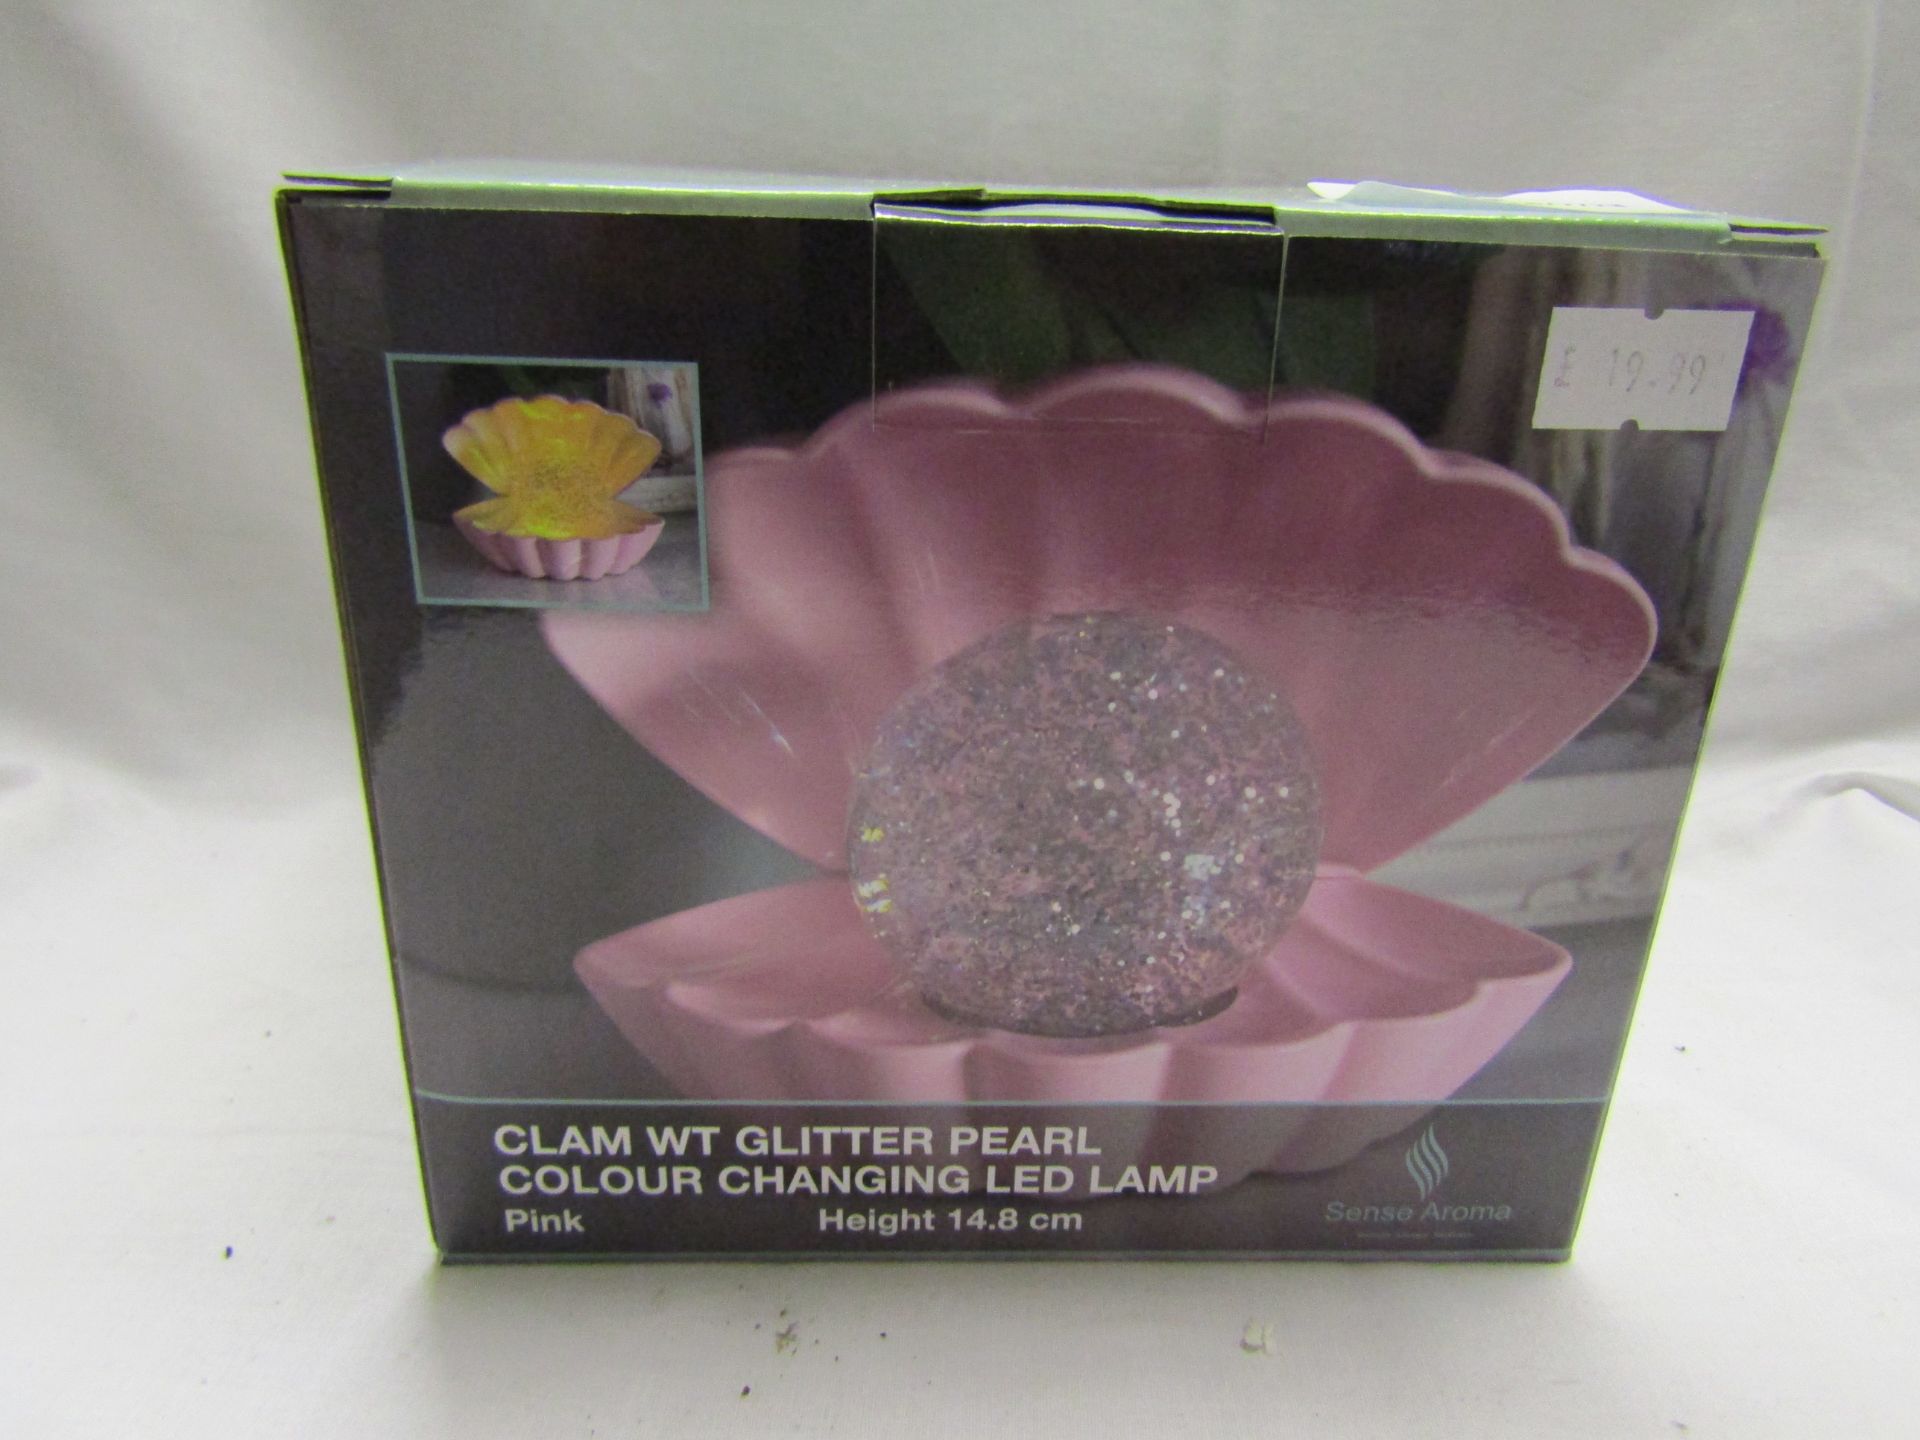 Sense Aroma Clam With Glitter Pearl Changing LED Lamp Black 14.8 CM Height Unchecked & Boxed